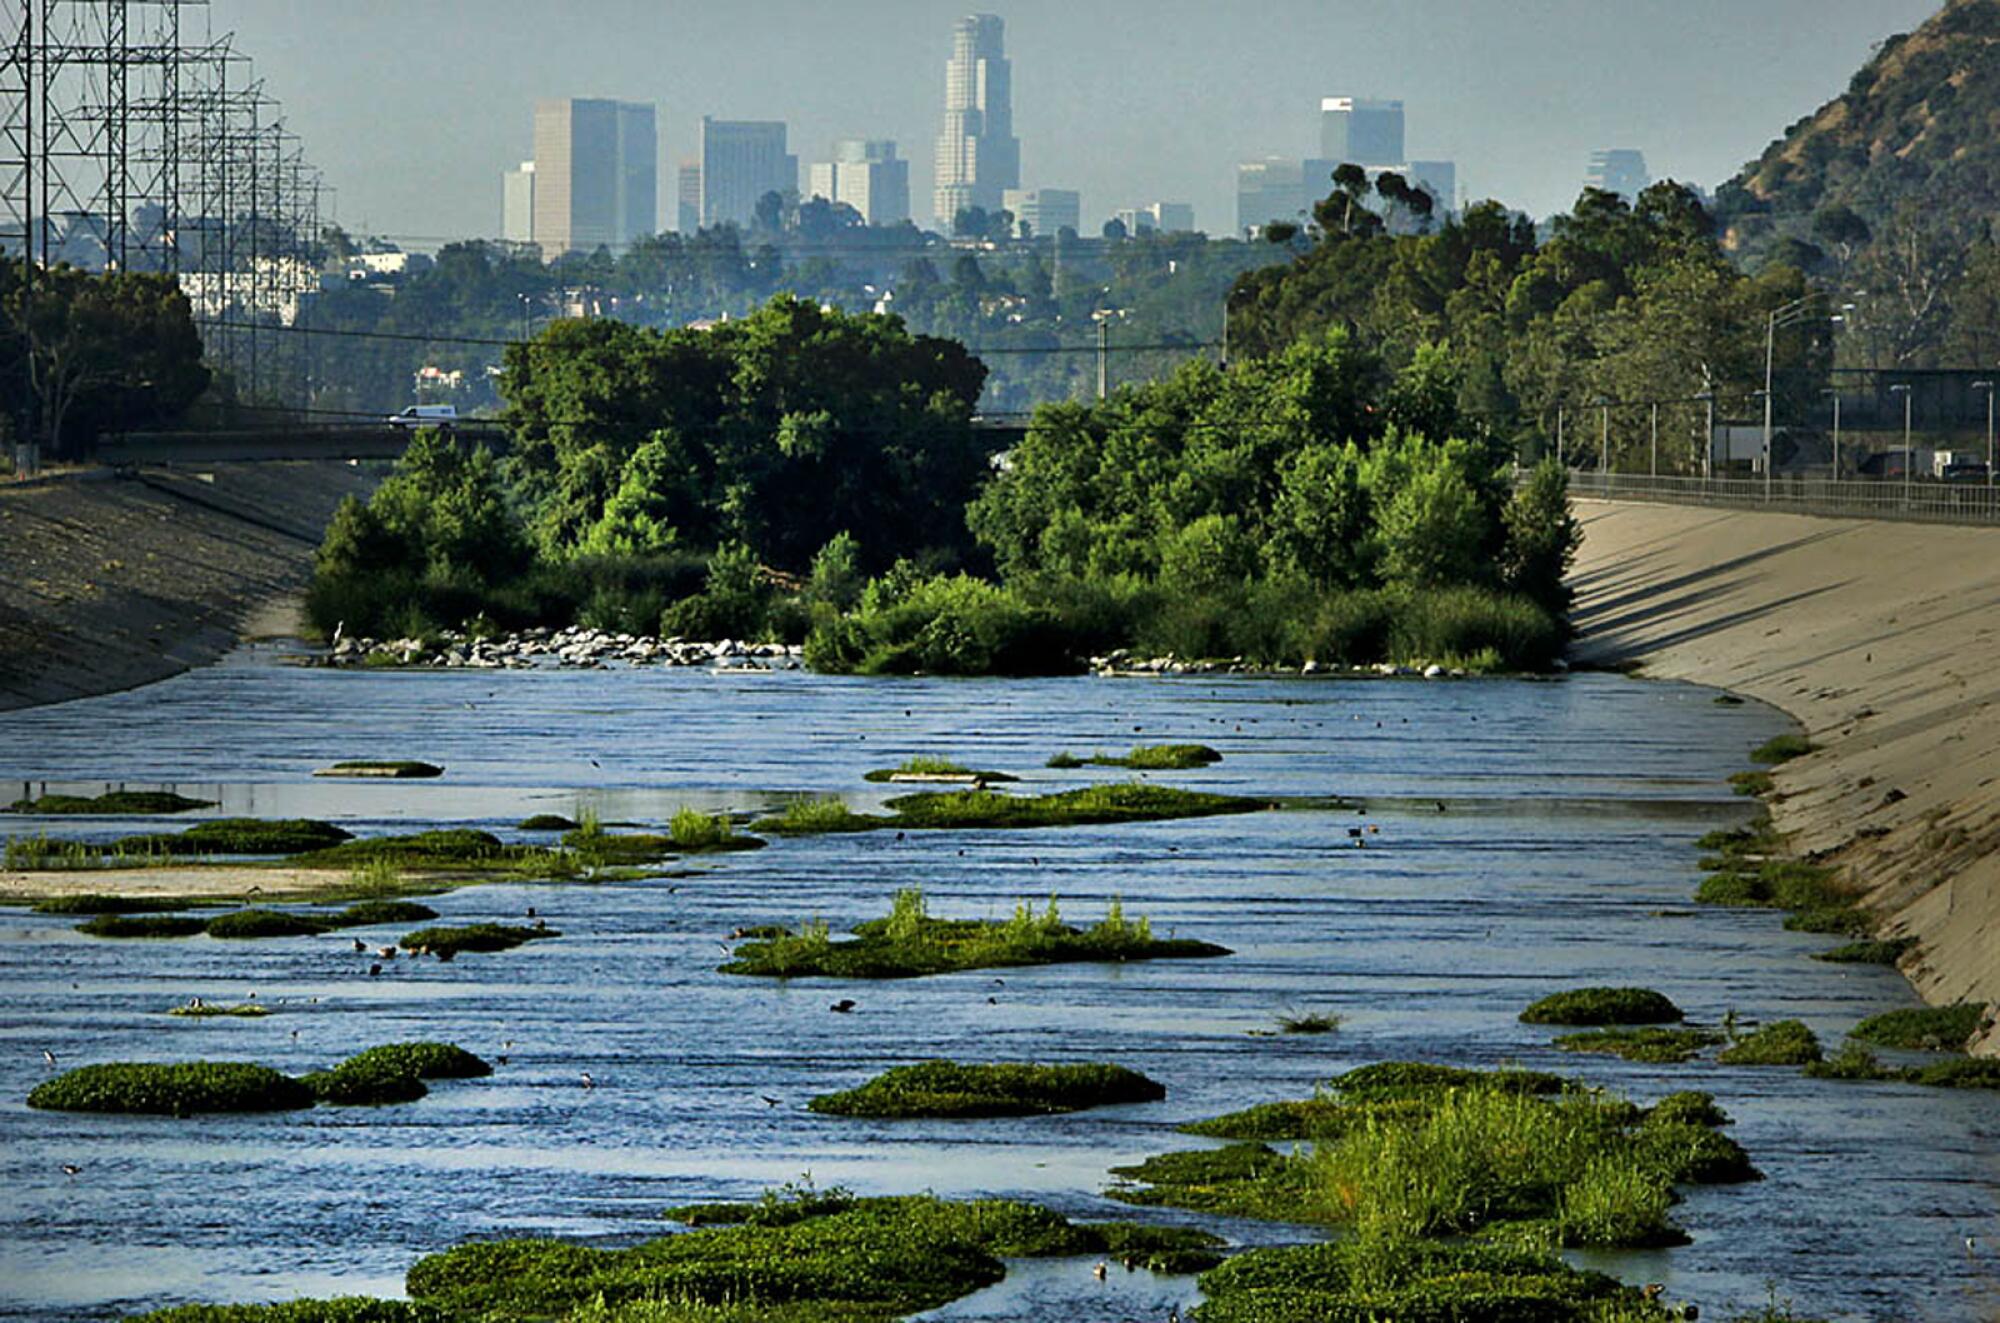 Green trees and shrubbery rise in the middle of a river as a city skyline looms in the background.